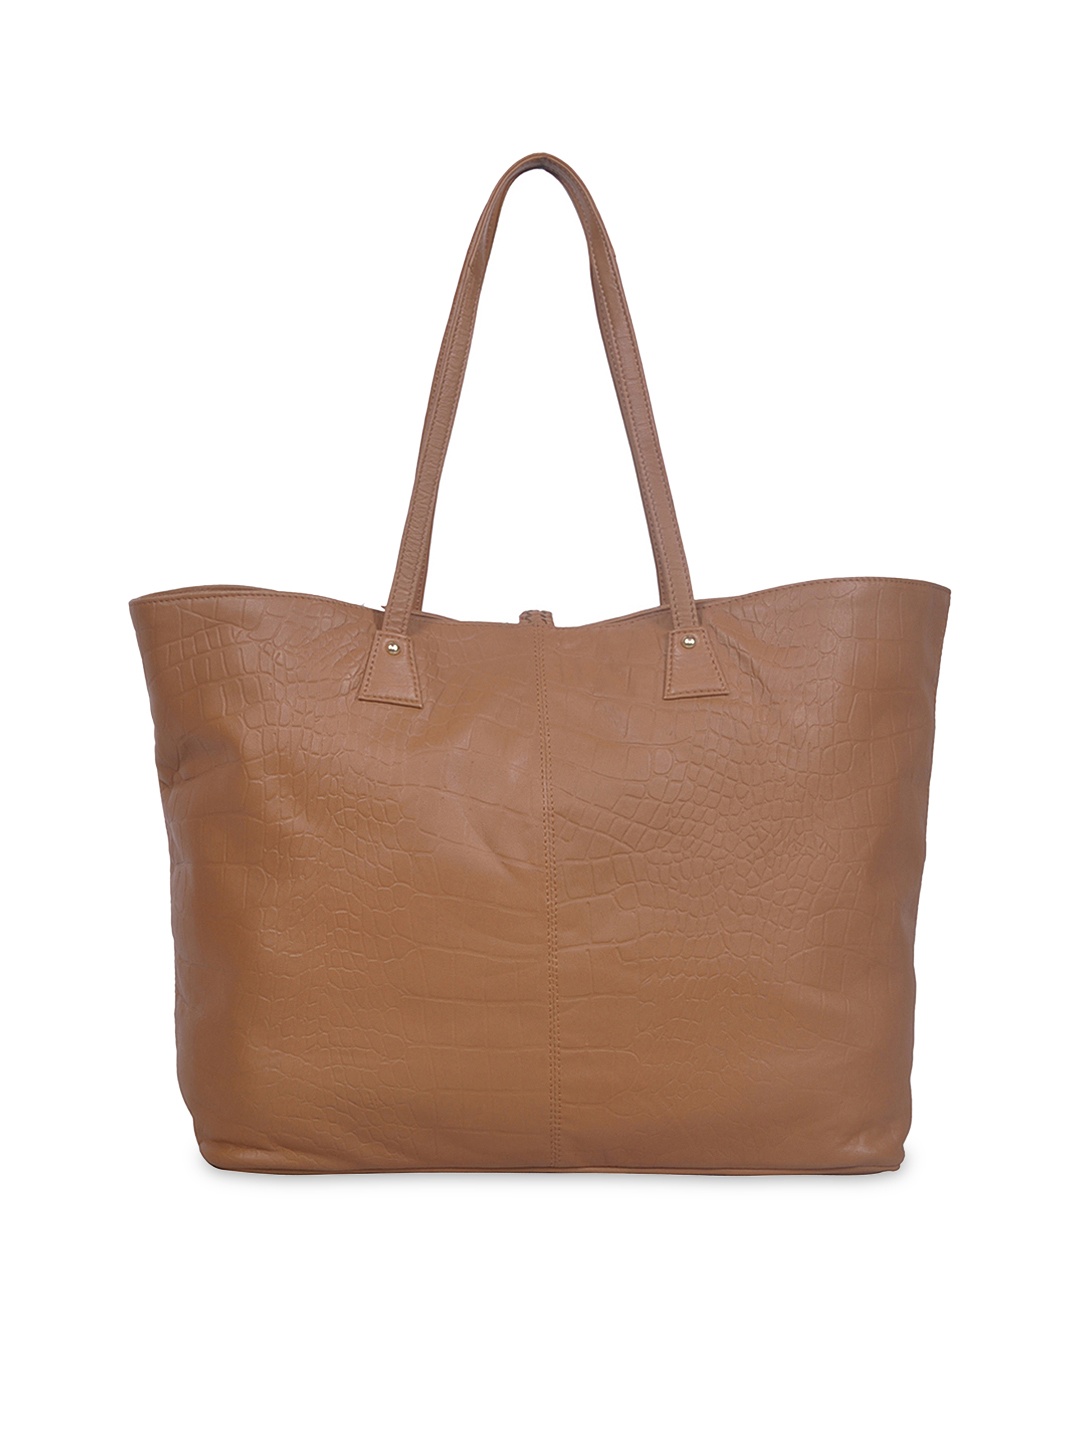 Myntra Justanned Women Brown Leather Tote Bag 809446 | Buy Myntra Justanned Tote Bags at best ...